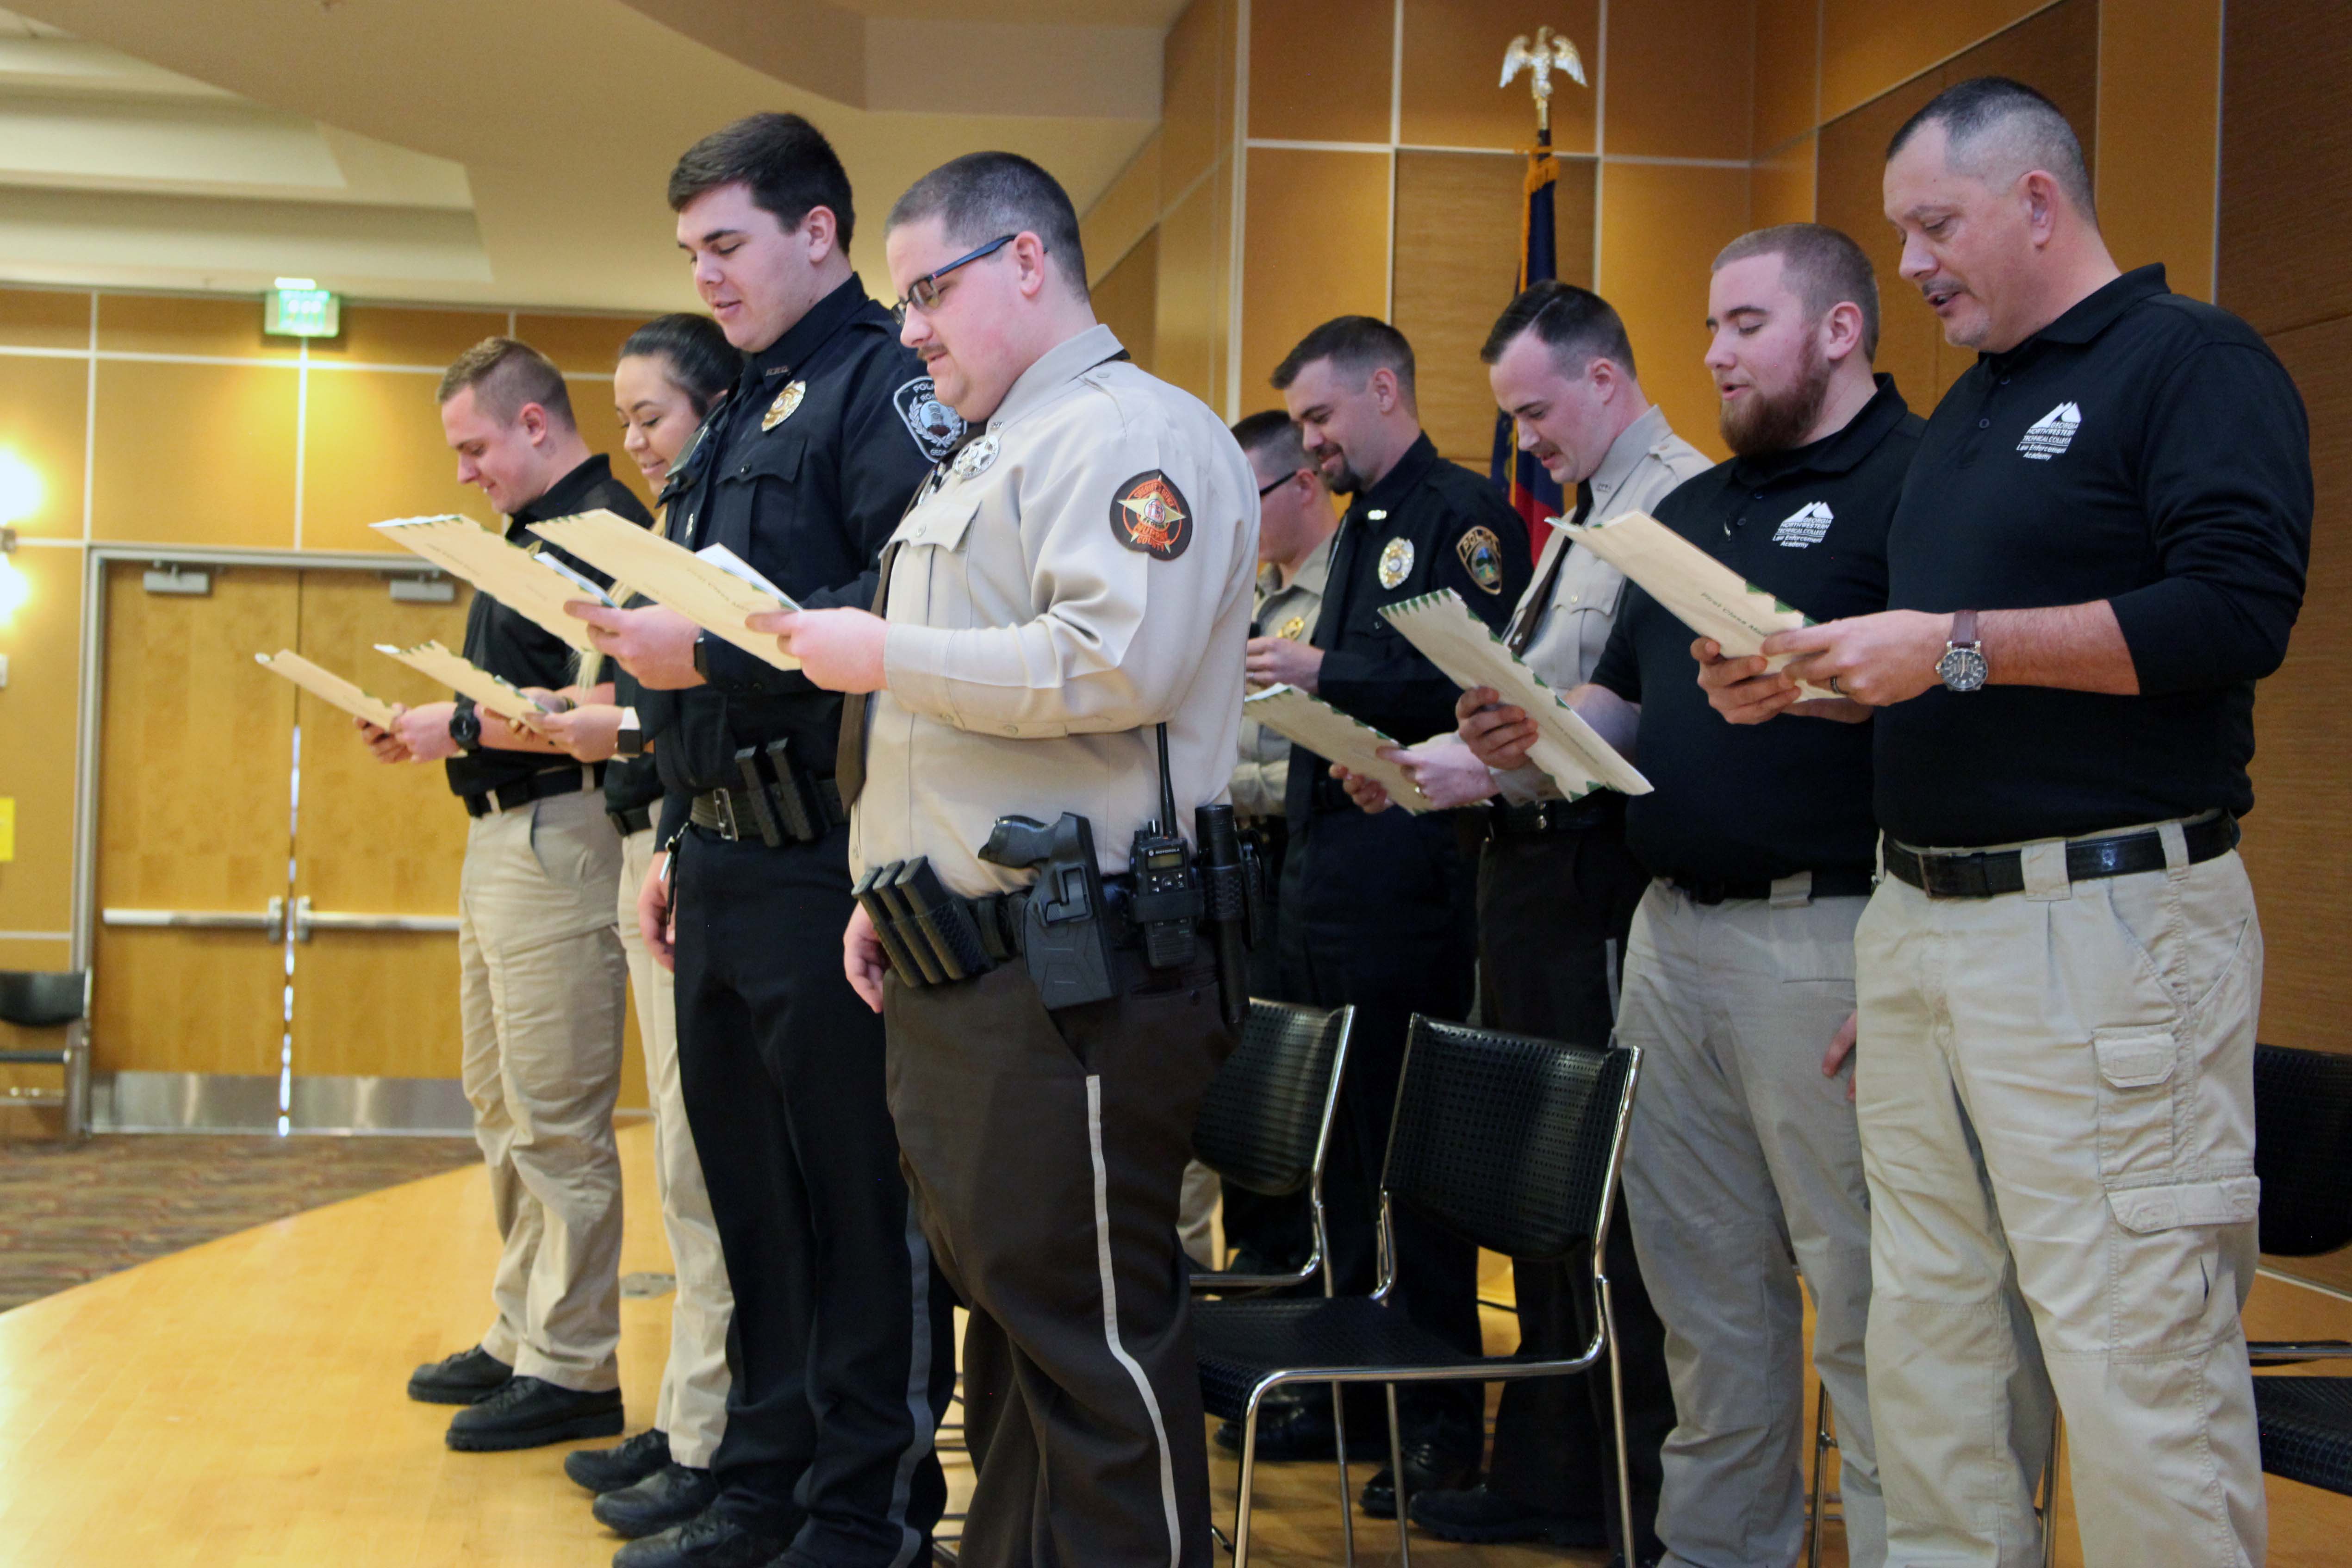 Ten graduates of Basic Law Enforcement Training Classes #201901 and #201902 said the “Oath of Honor” on Thursday, Dec. 12, to conclude graduation. 